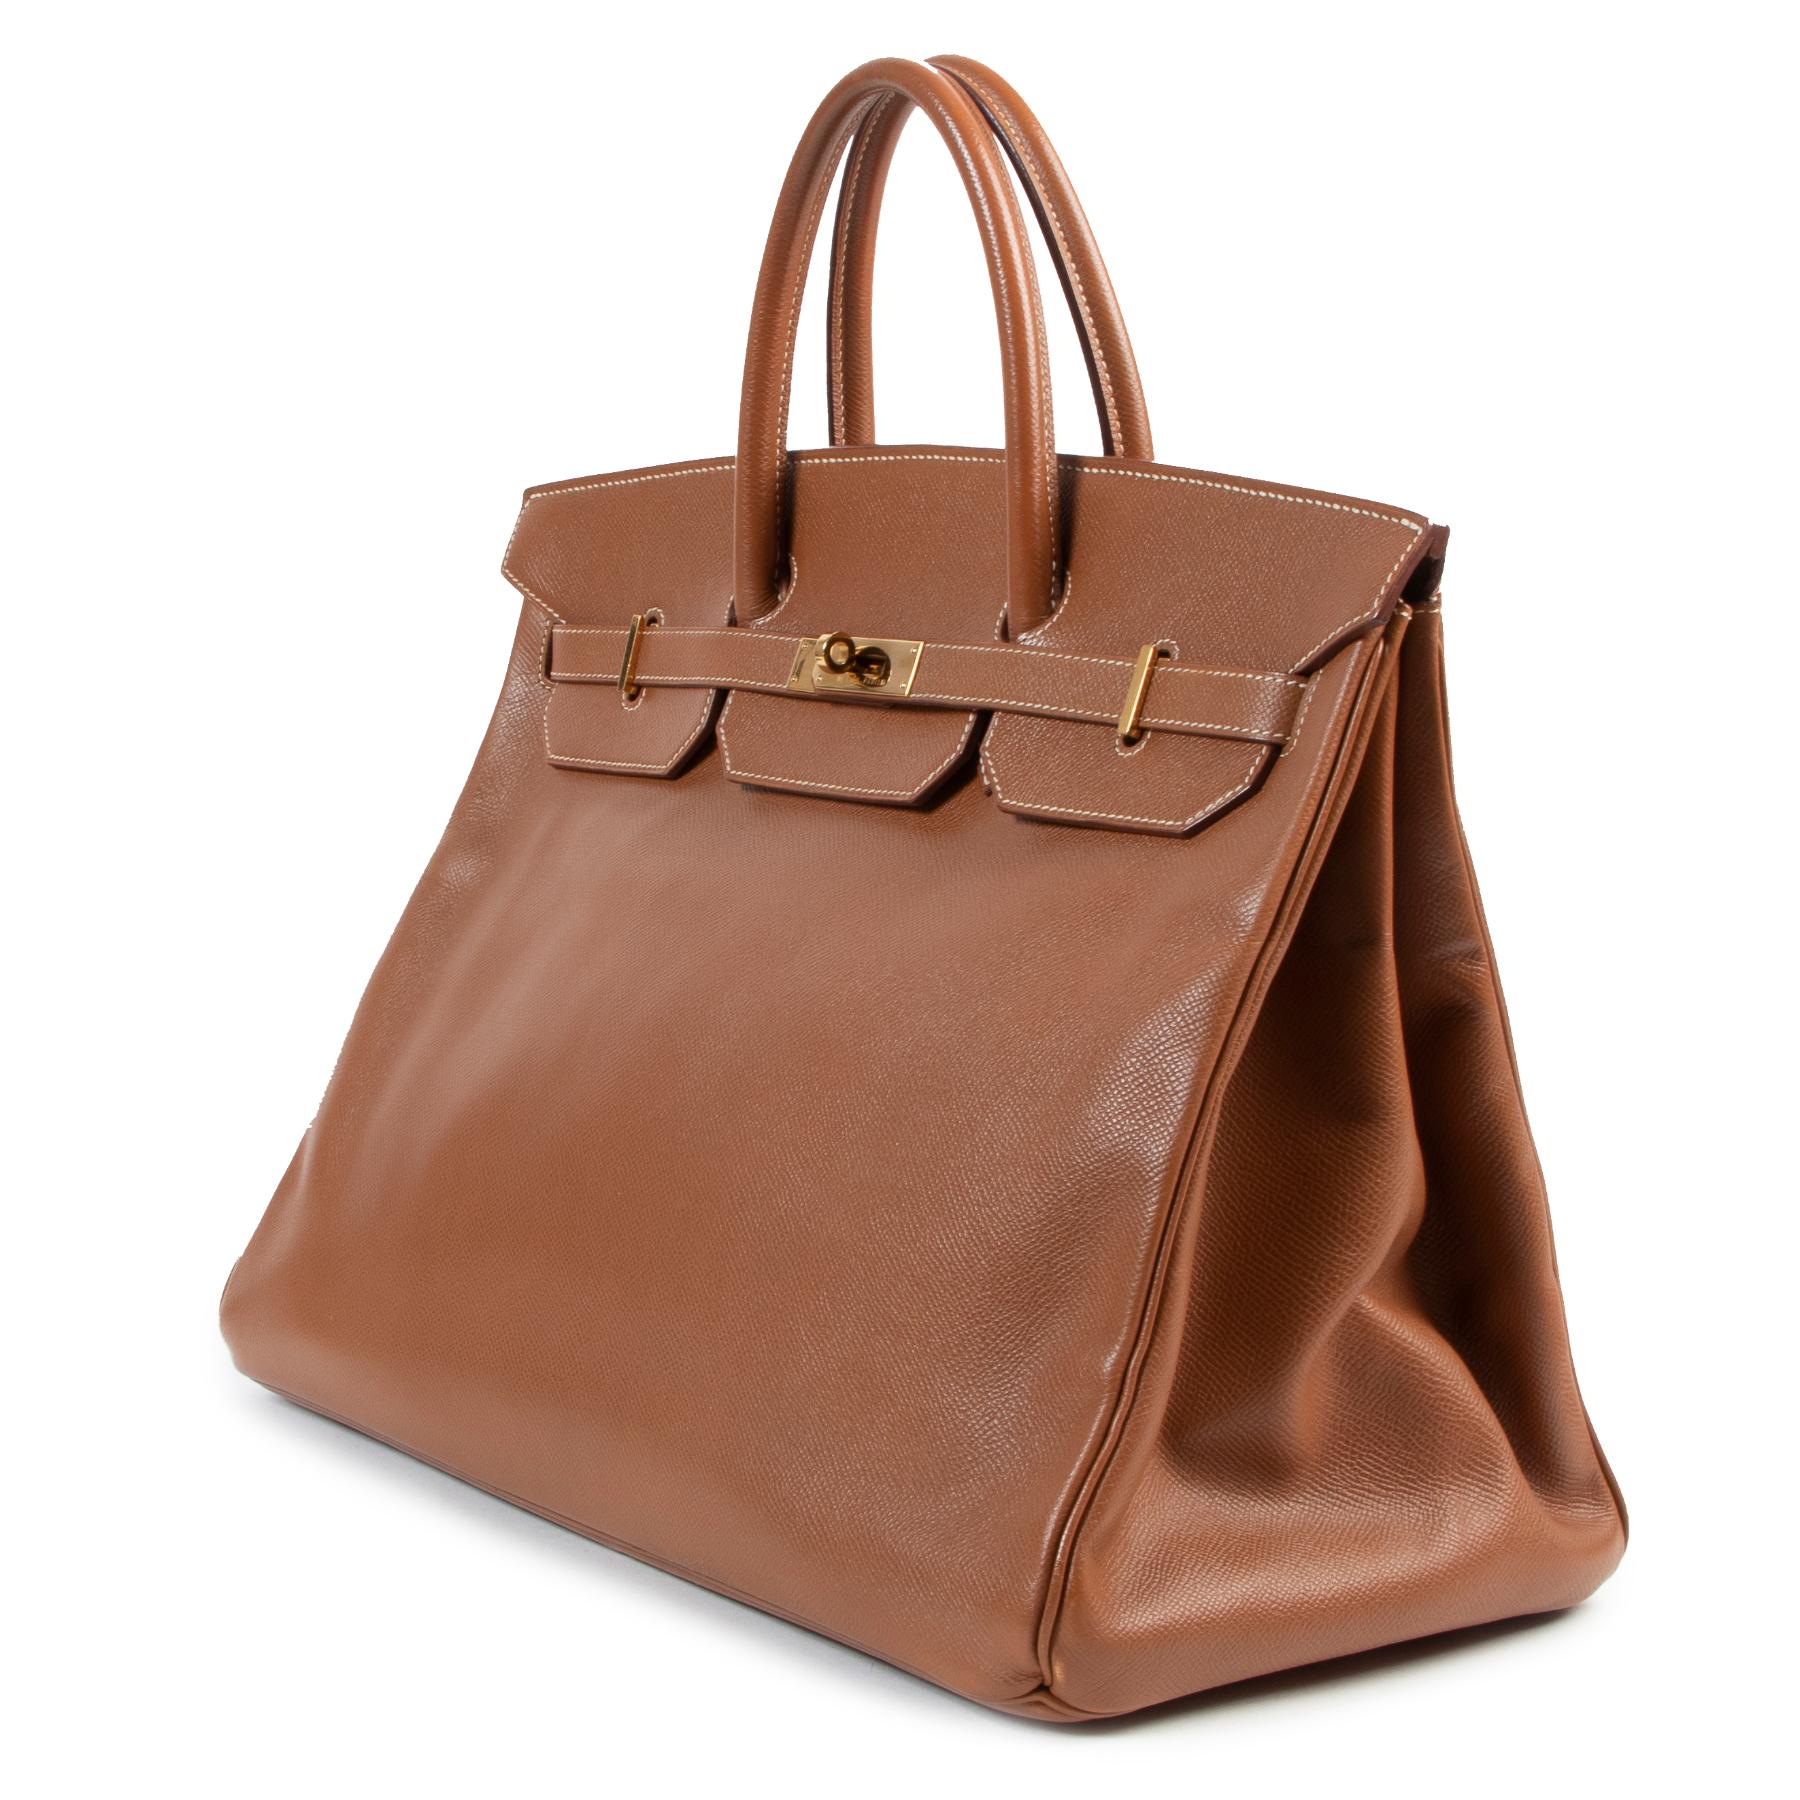 Good condition

Hermès Birkin 40cm Gold Cuir Courchevel

A similar leather to the popular epsom, the Courchevel offers a very even grain throughout.

Another slight differnce is that it is glossier and darker at the top of the grain than the Epsom,